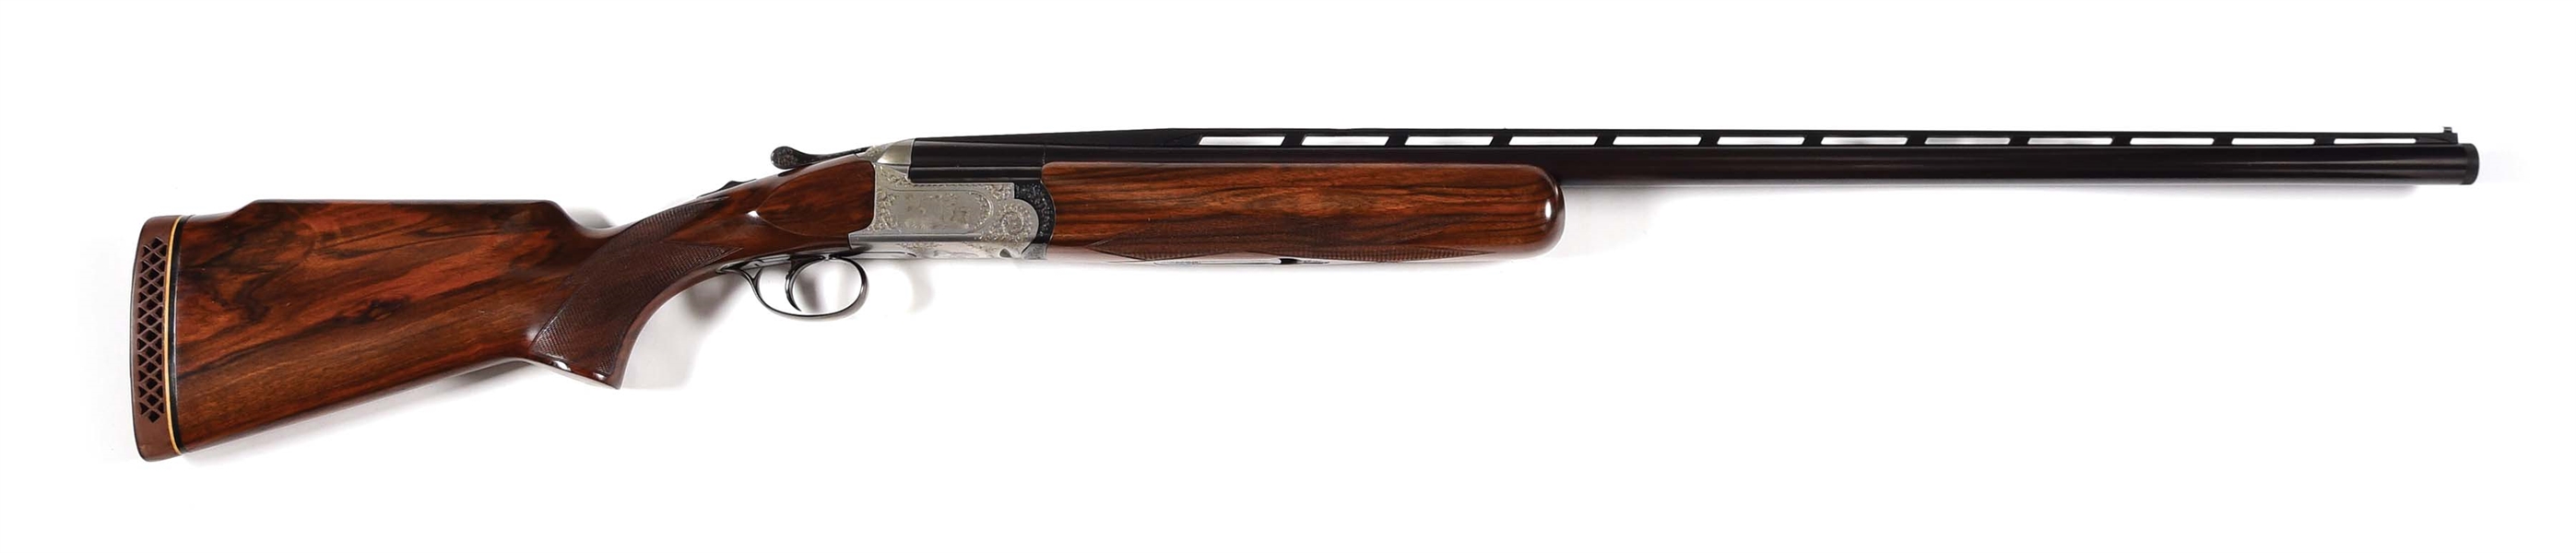 (M) PERAZZI MX 3 SINGLE DOUBLE TRAP SET SHOTGUN ENGRAVED BY GOURNET WITH EXTRA FIELD BARRELS AND STOCKS WITH CASES.